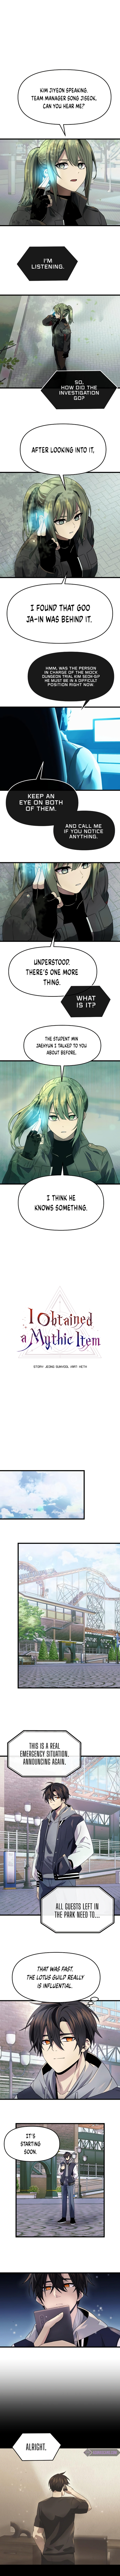 I Obtained a Mythic Item 41